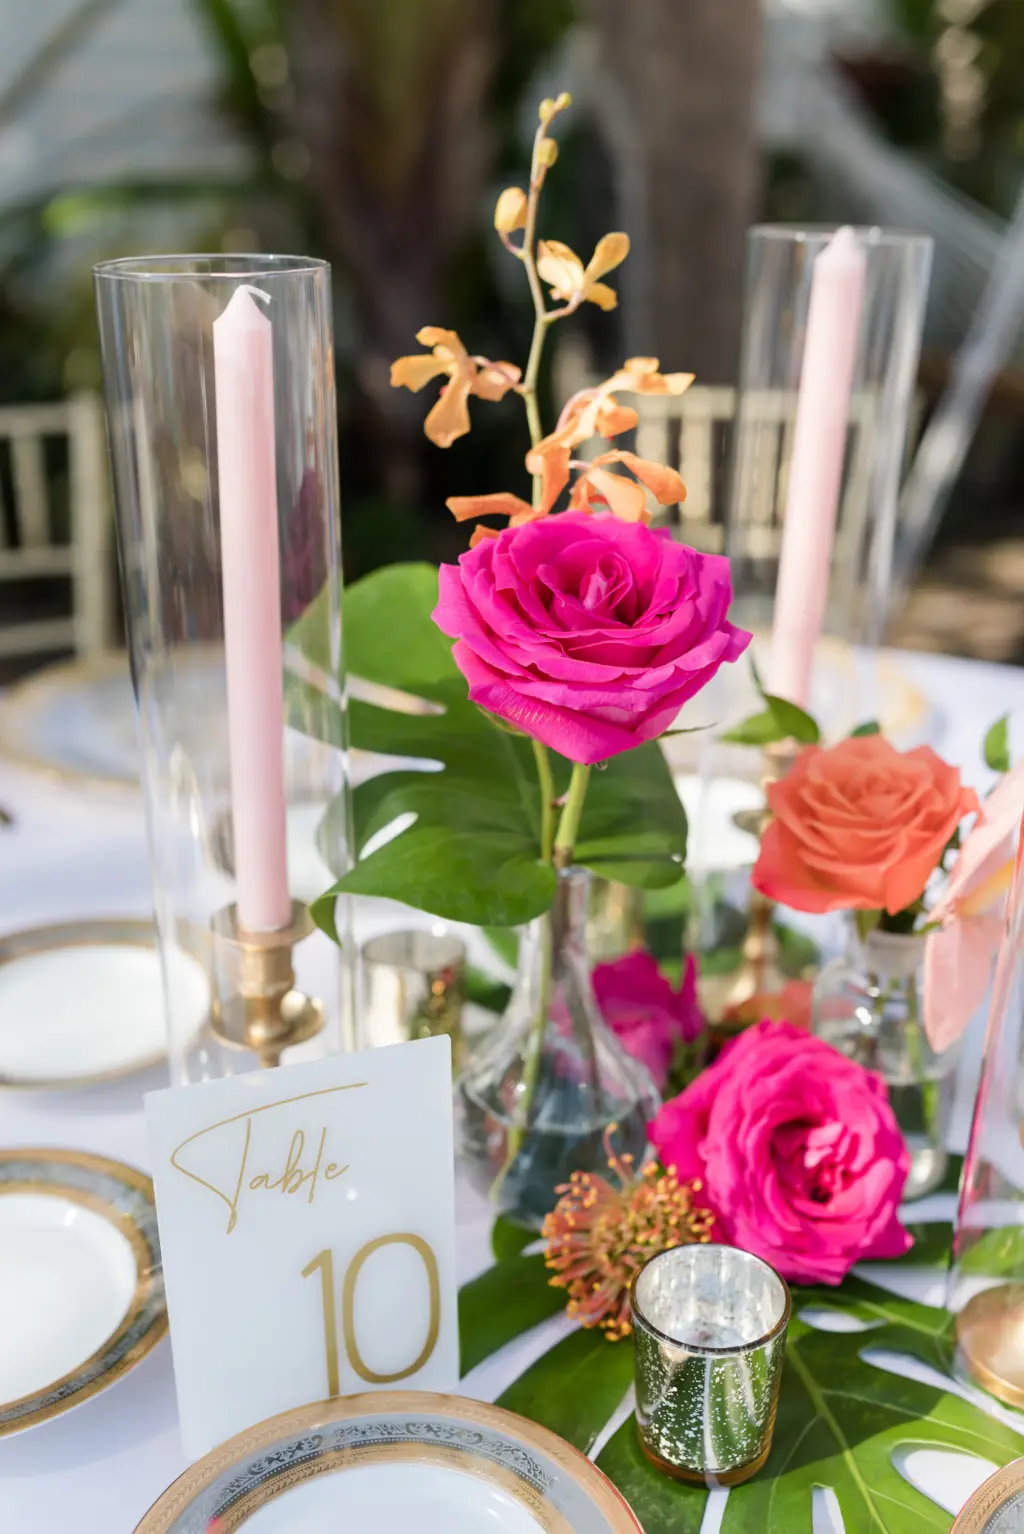 Tropical Hot Pink and Orange Floral Centerpieces with Monstera and Greenery Detailing Centerpiece Inspiration | Sarasota Florist Save the Date Florida